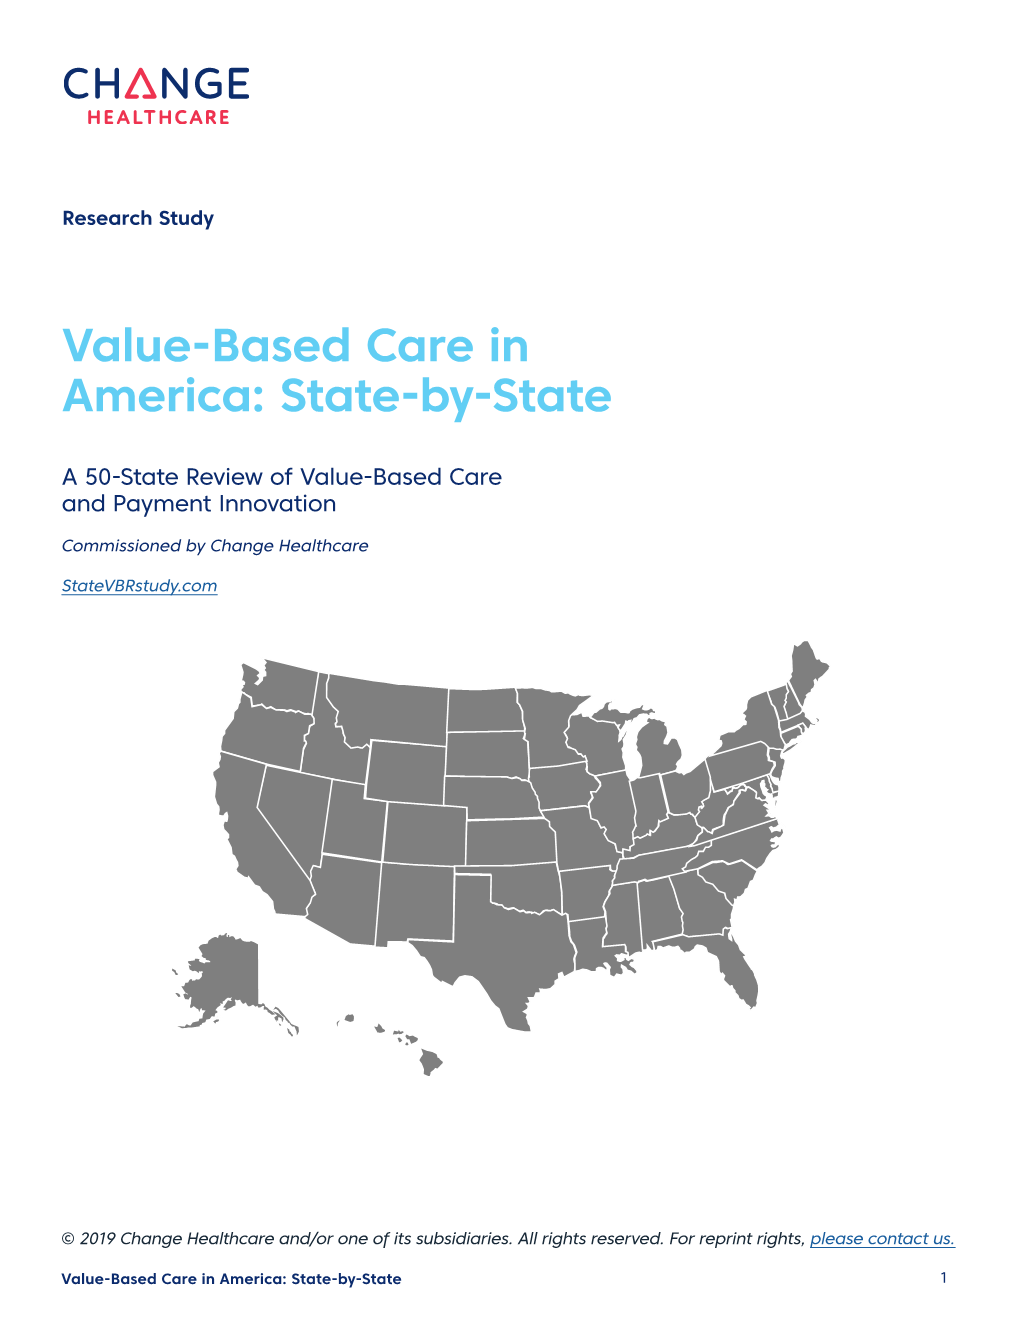 Value-Based Care in America: State-By-State